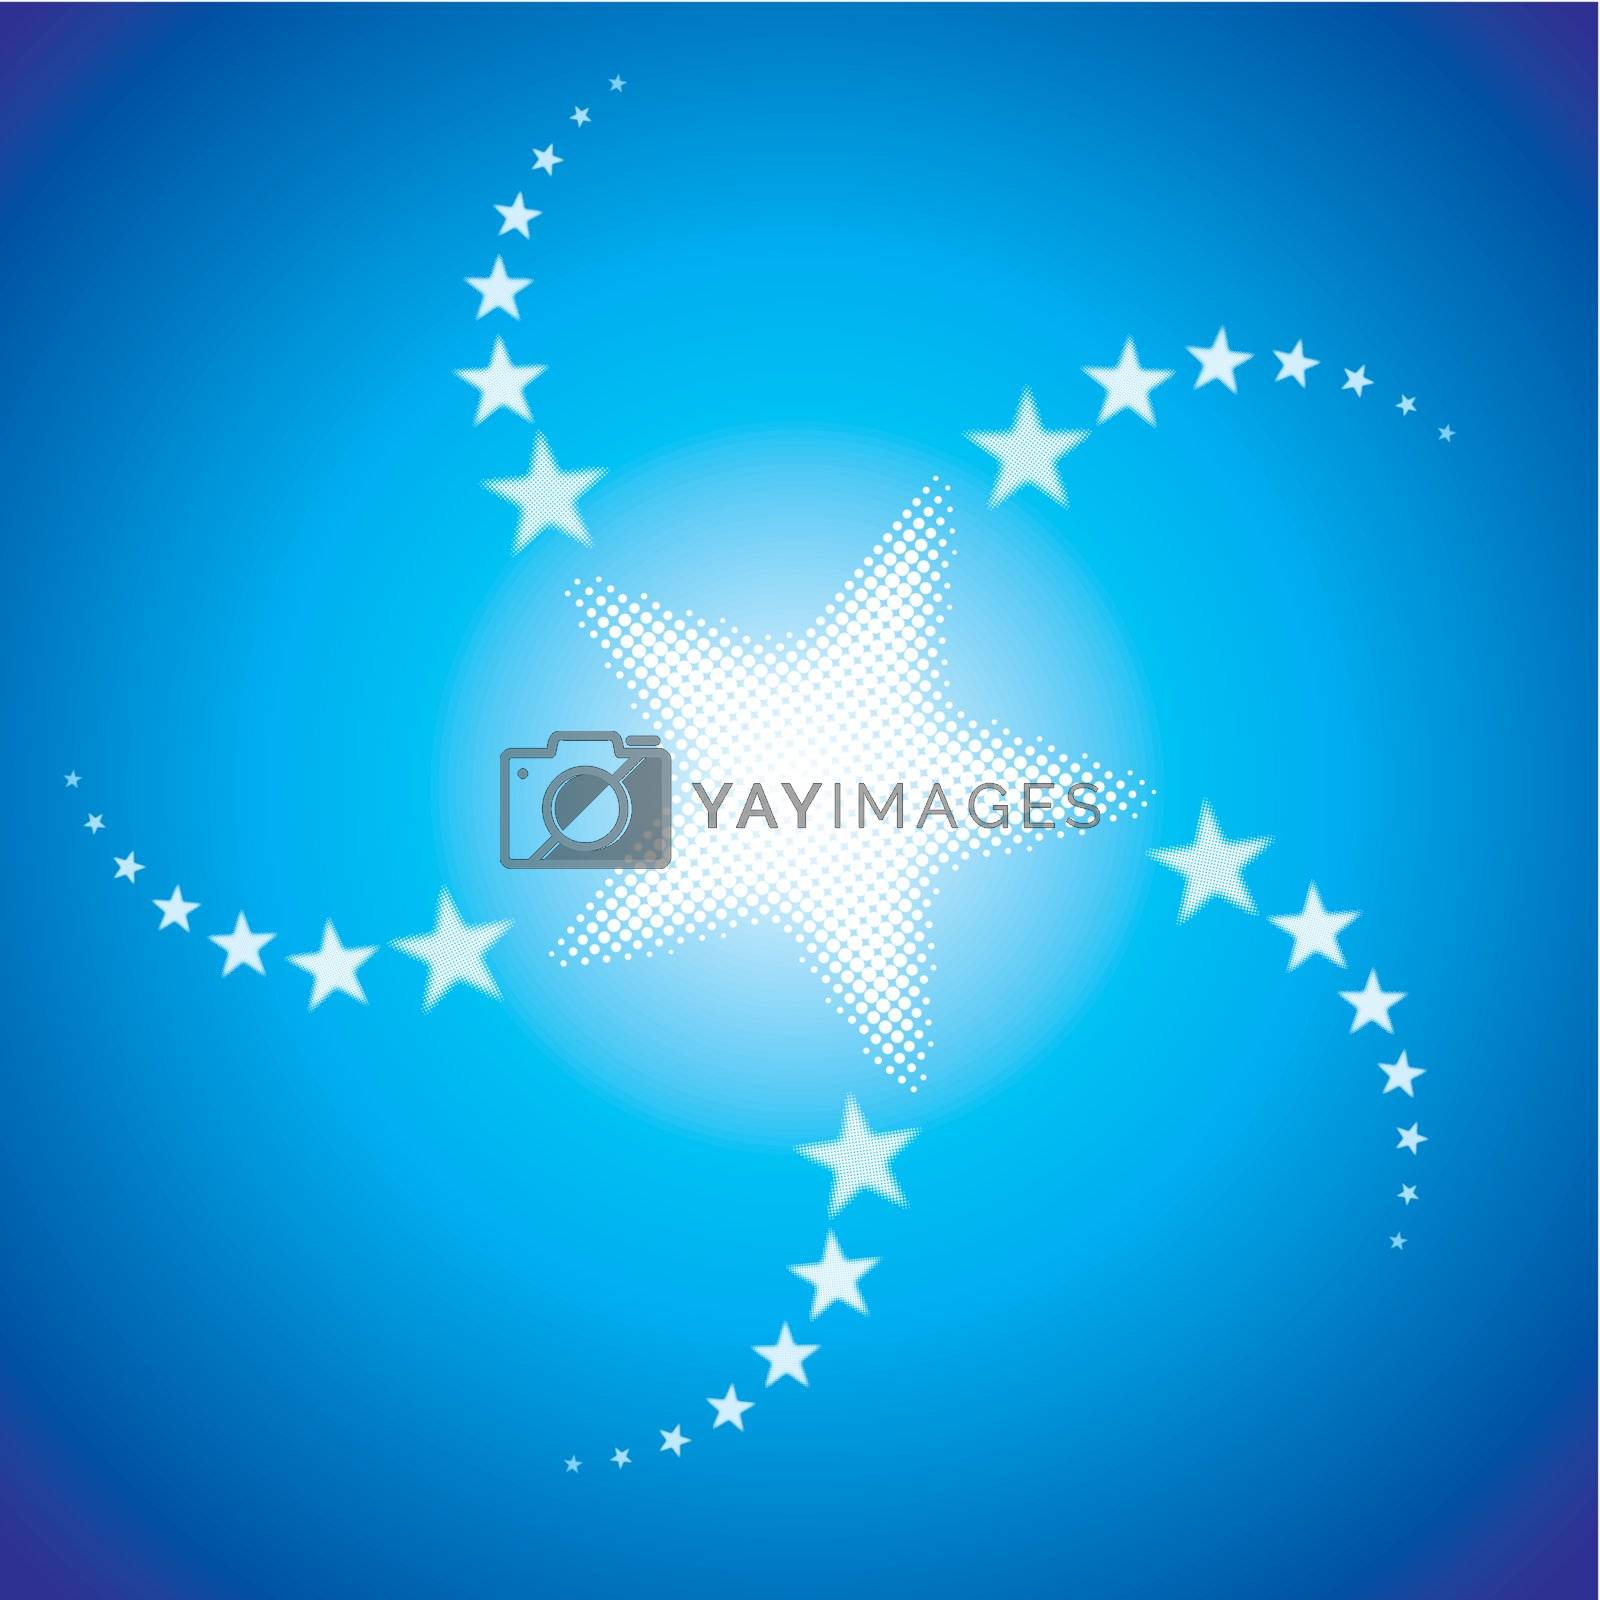 Royalty free image of Starburst background by oxygen64